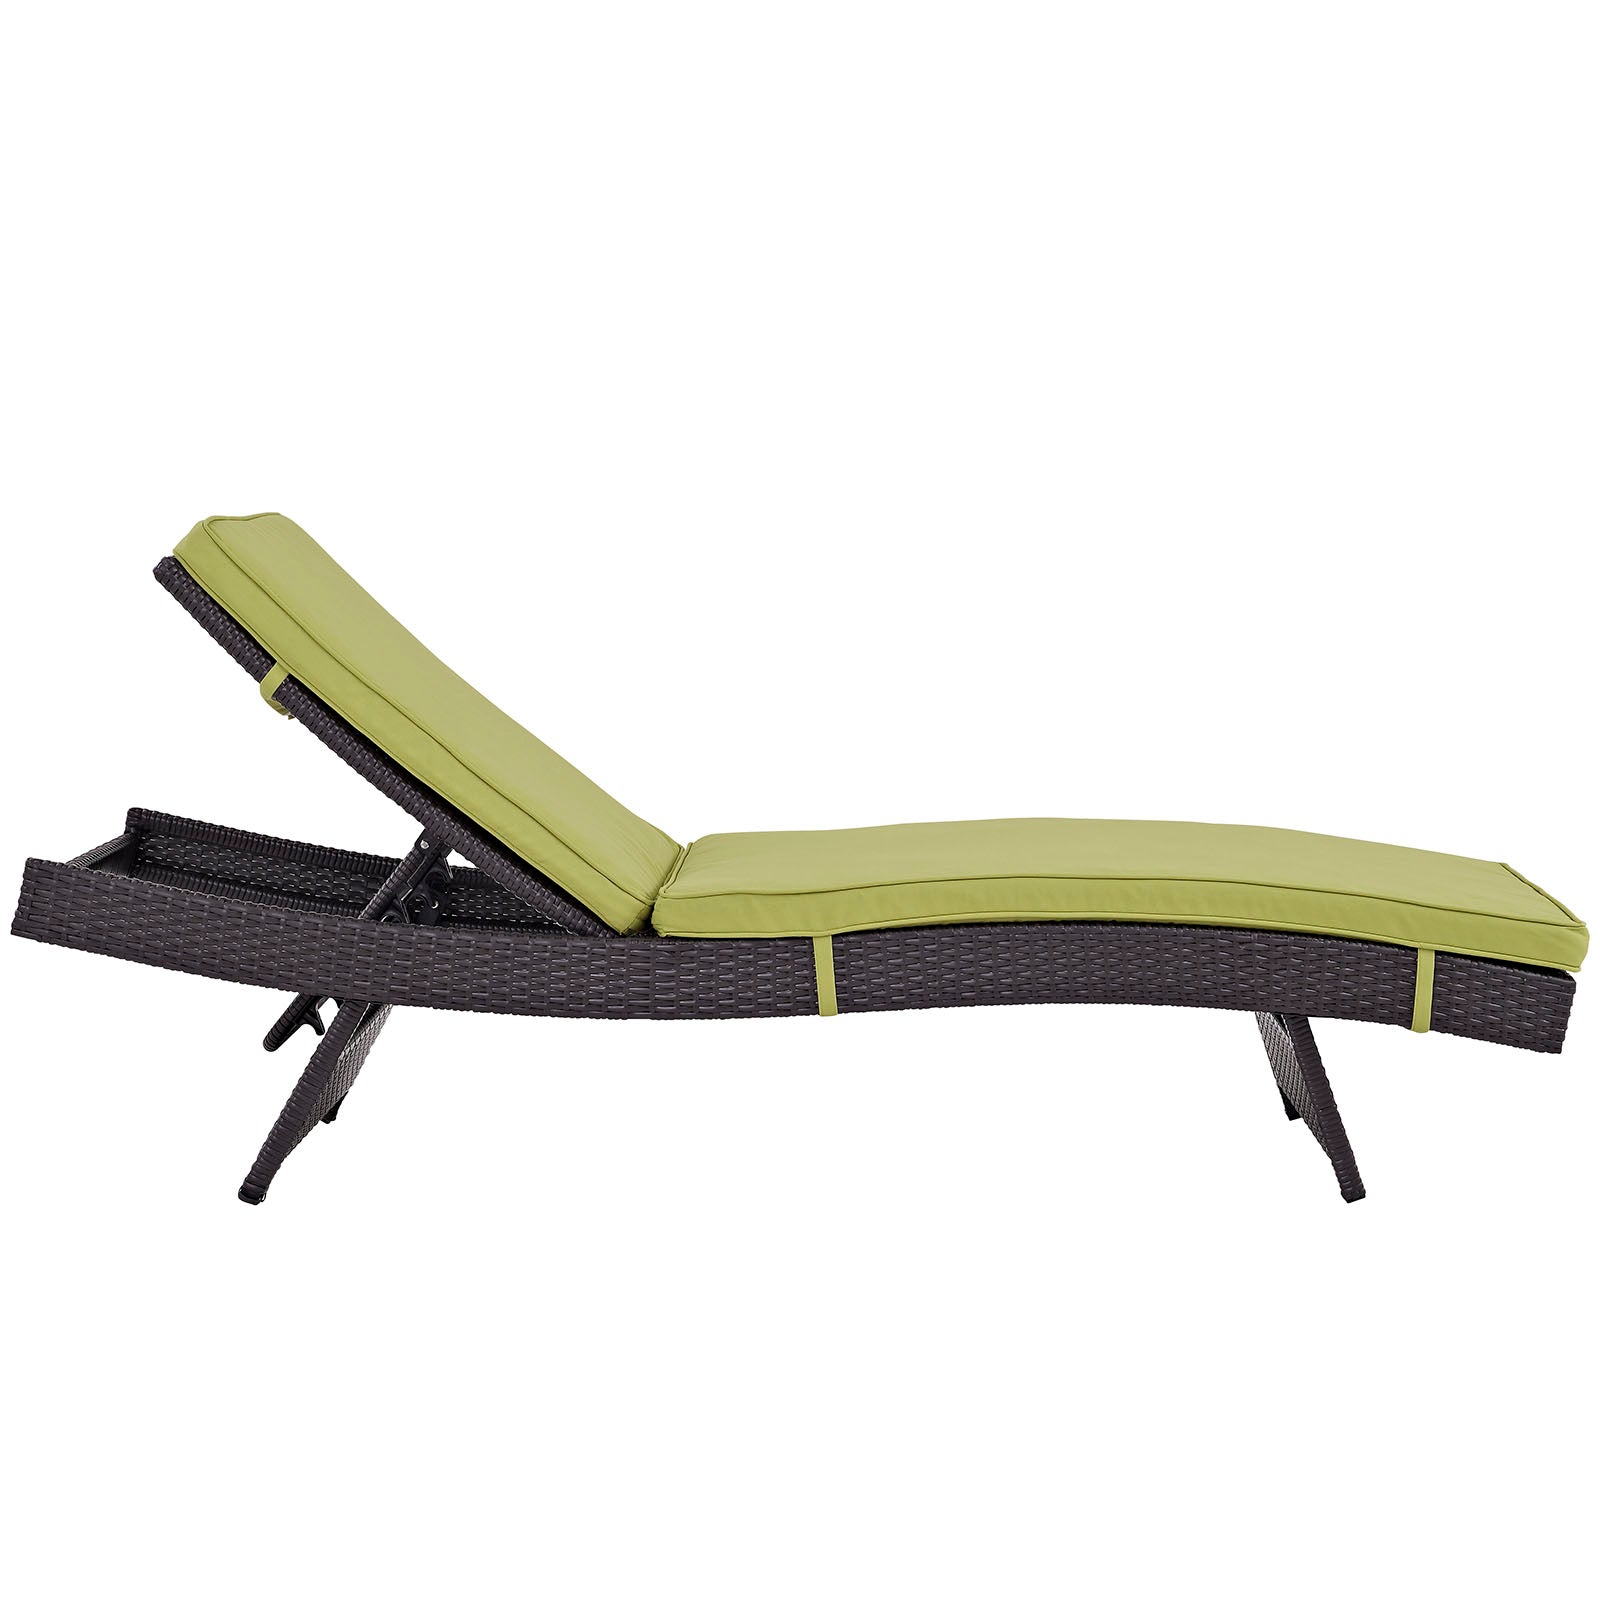 Modway Outdoor Loungers - Convene Chaise Outdoor Patio Set of 6 Espresso Peridot